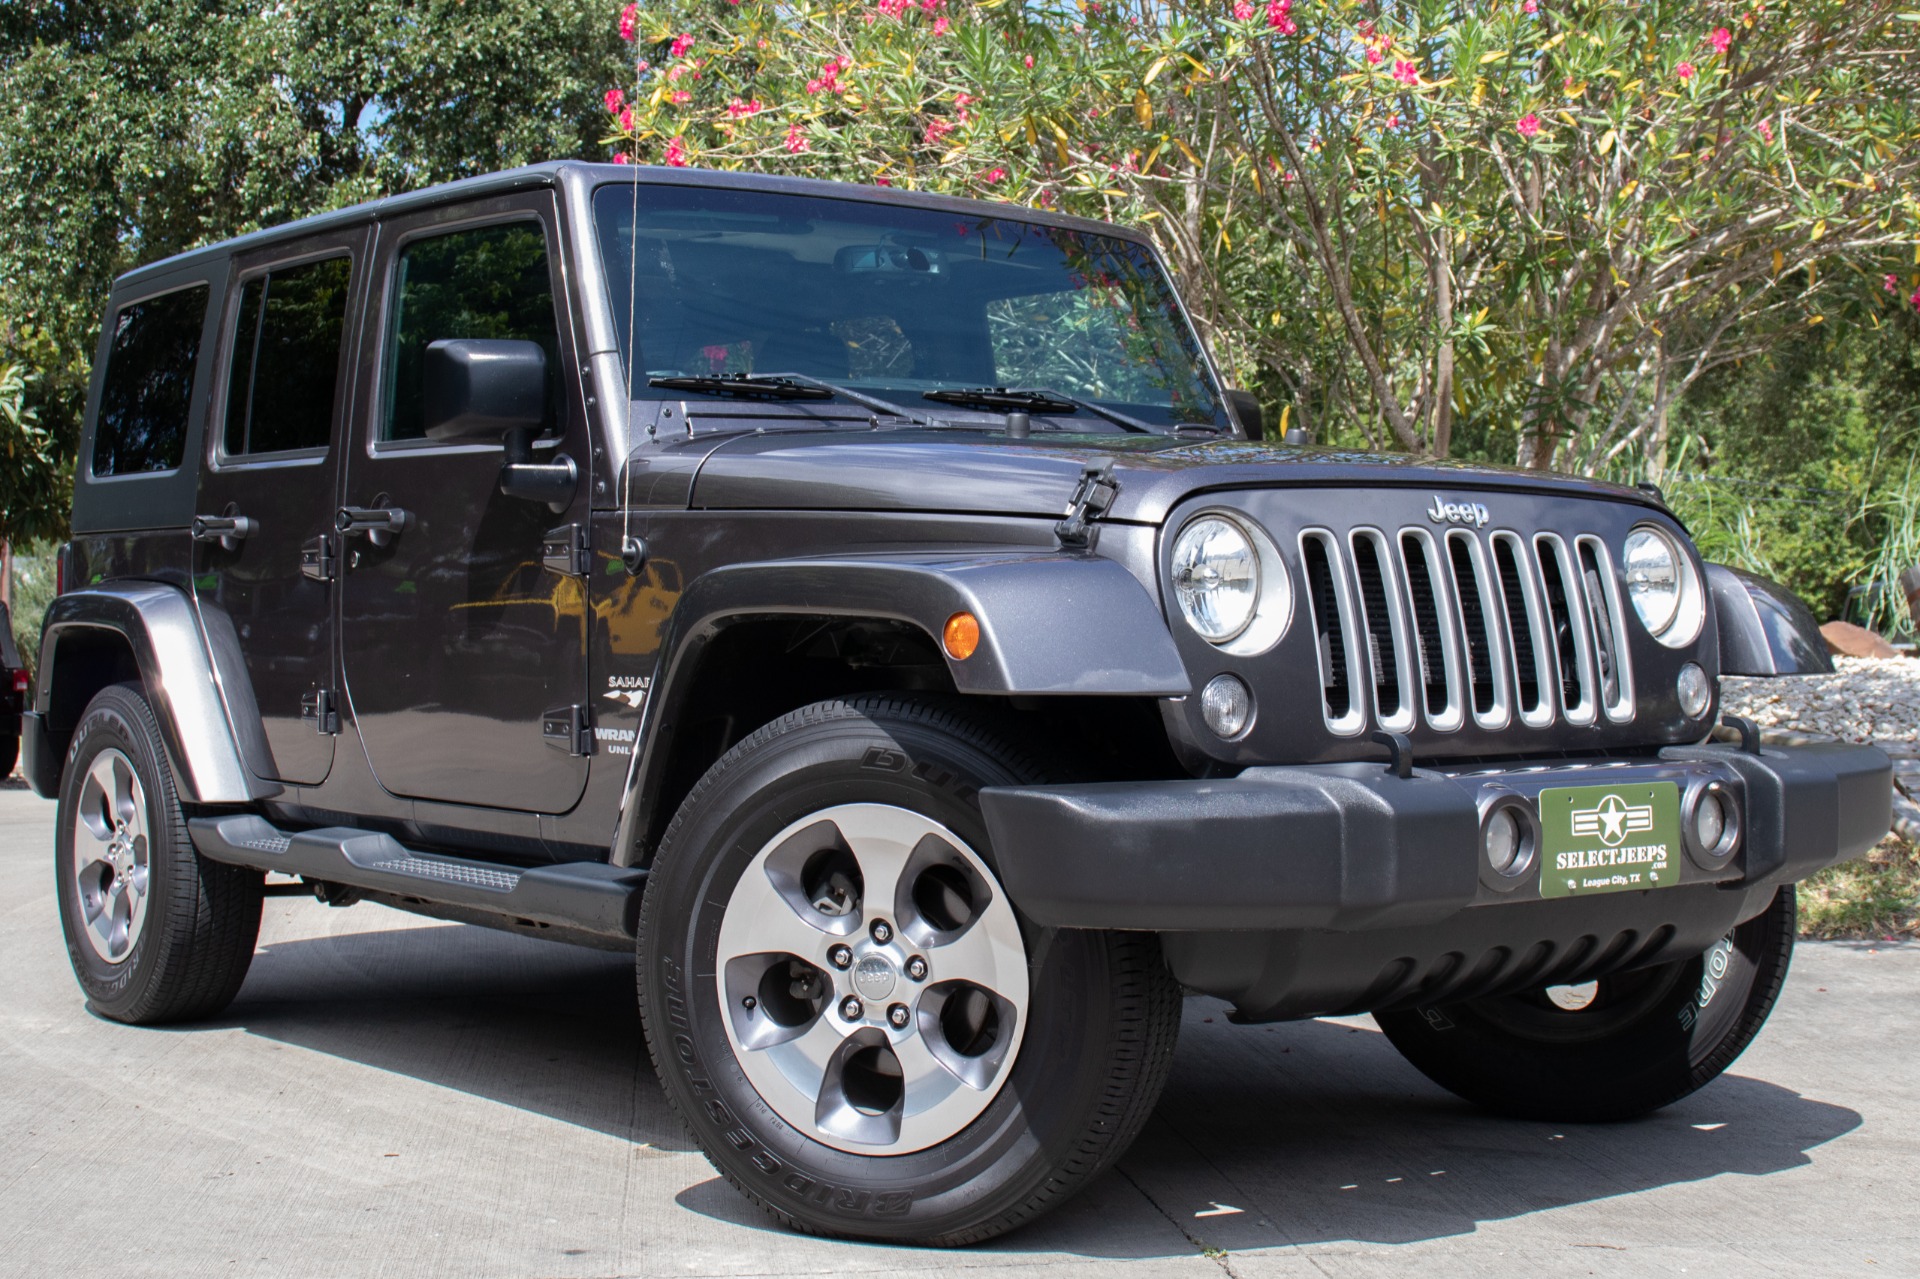 Used 2016 Jeep Wrangler Unlimited Sahara For Sale ($29,995) | Select Jeeps  Inc. Stock #221737